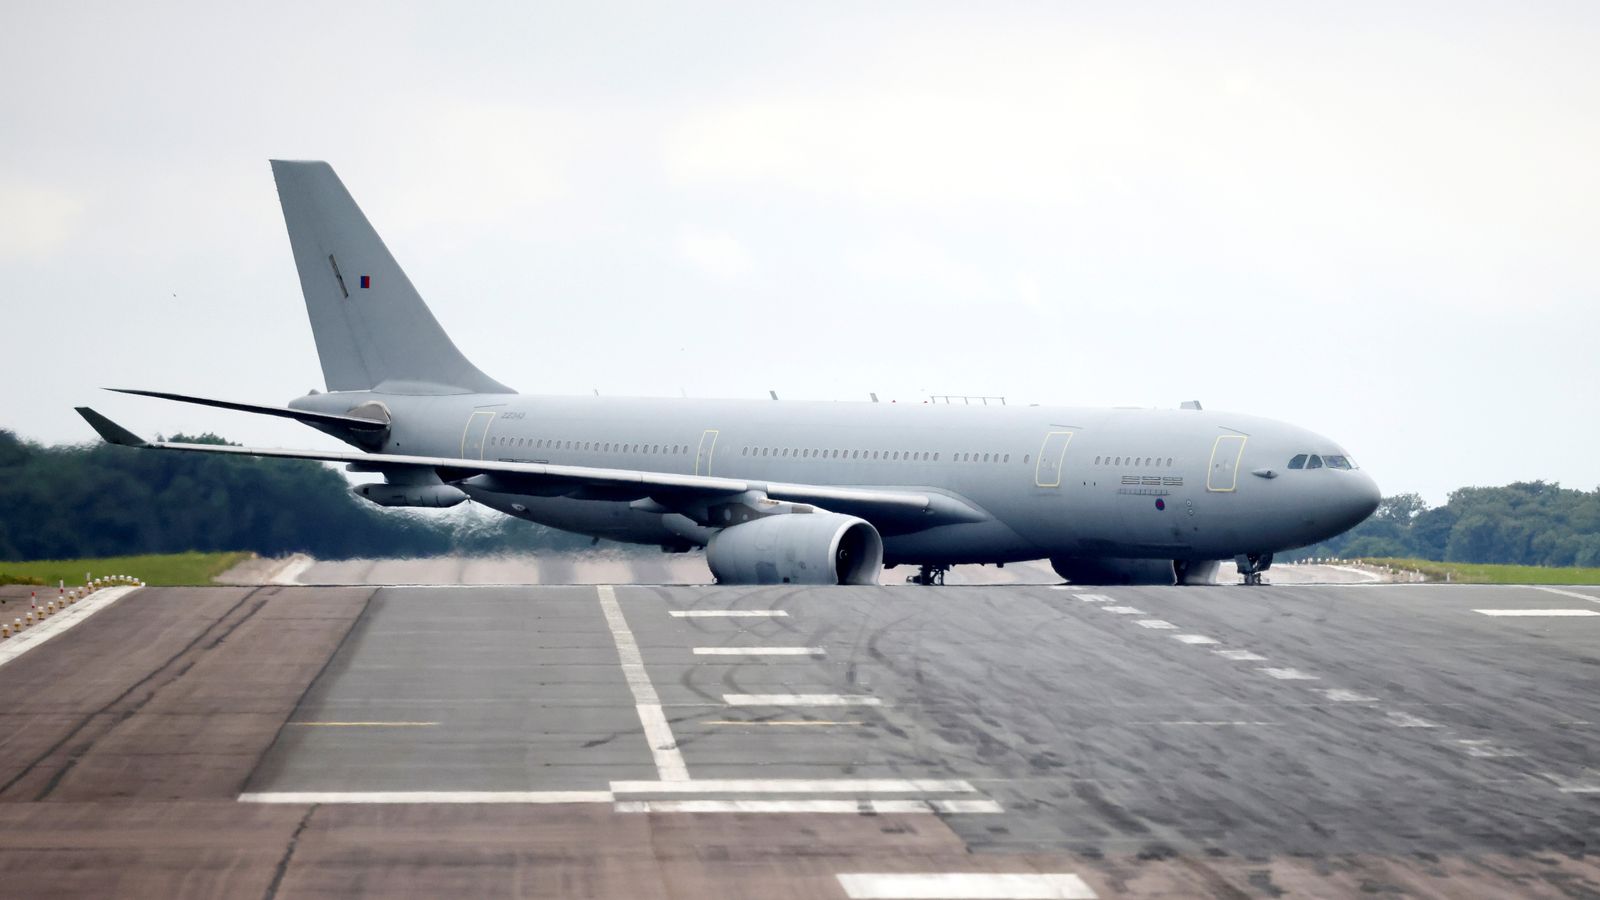 Government 'operationalising' Rwanda flights amid reports RAF Voyagers could be used